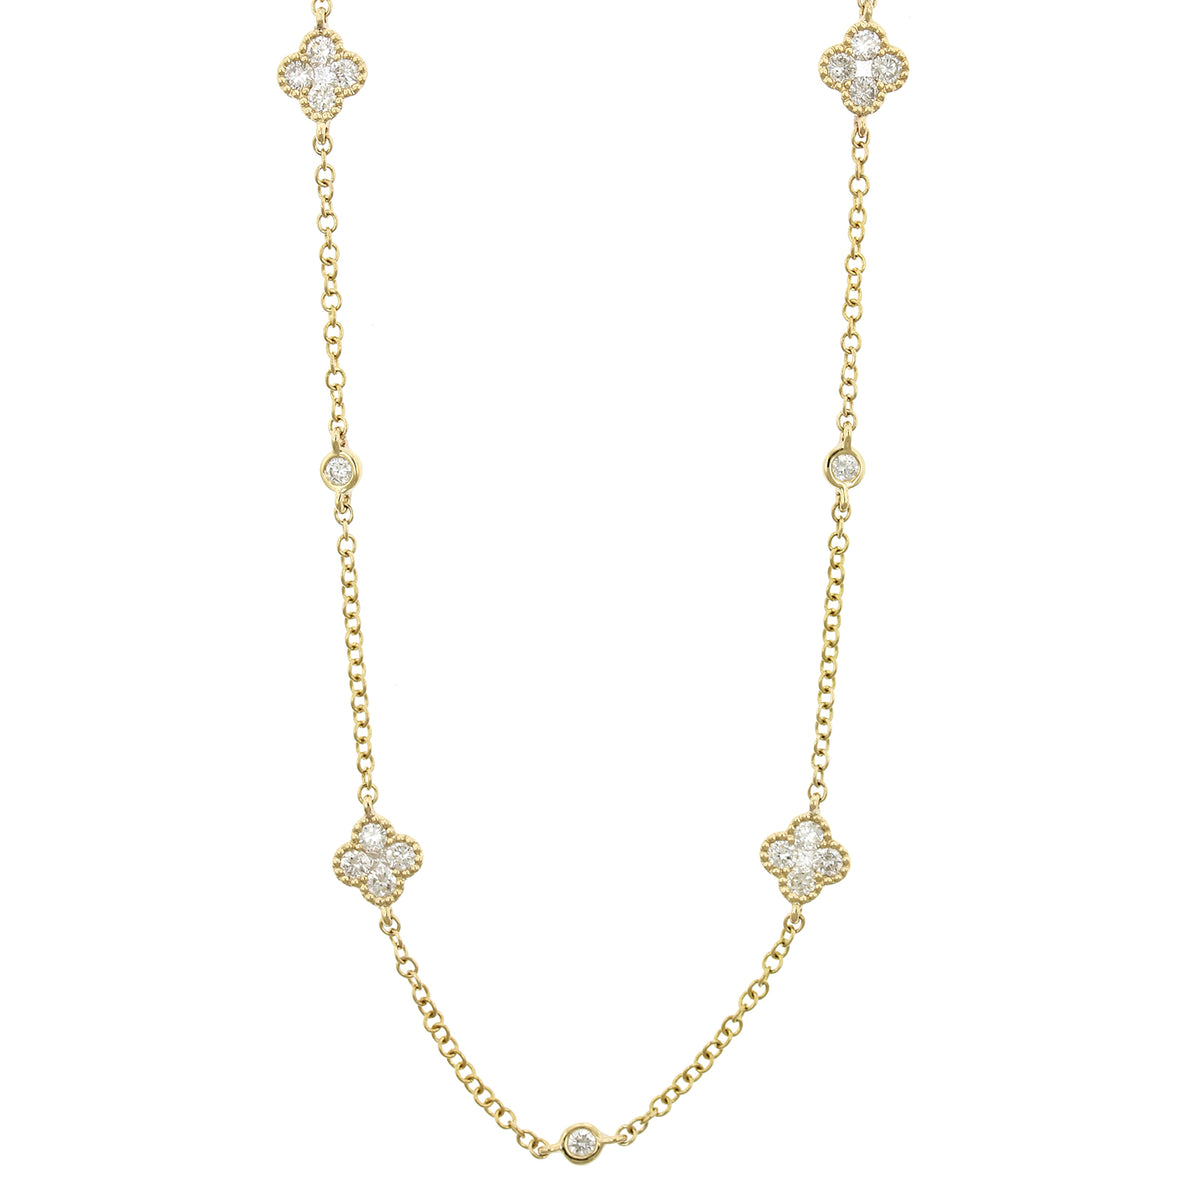 14K Yellow Gold Diamond Clover Shaped Necklace